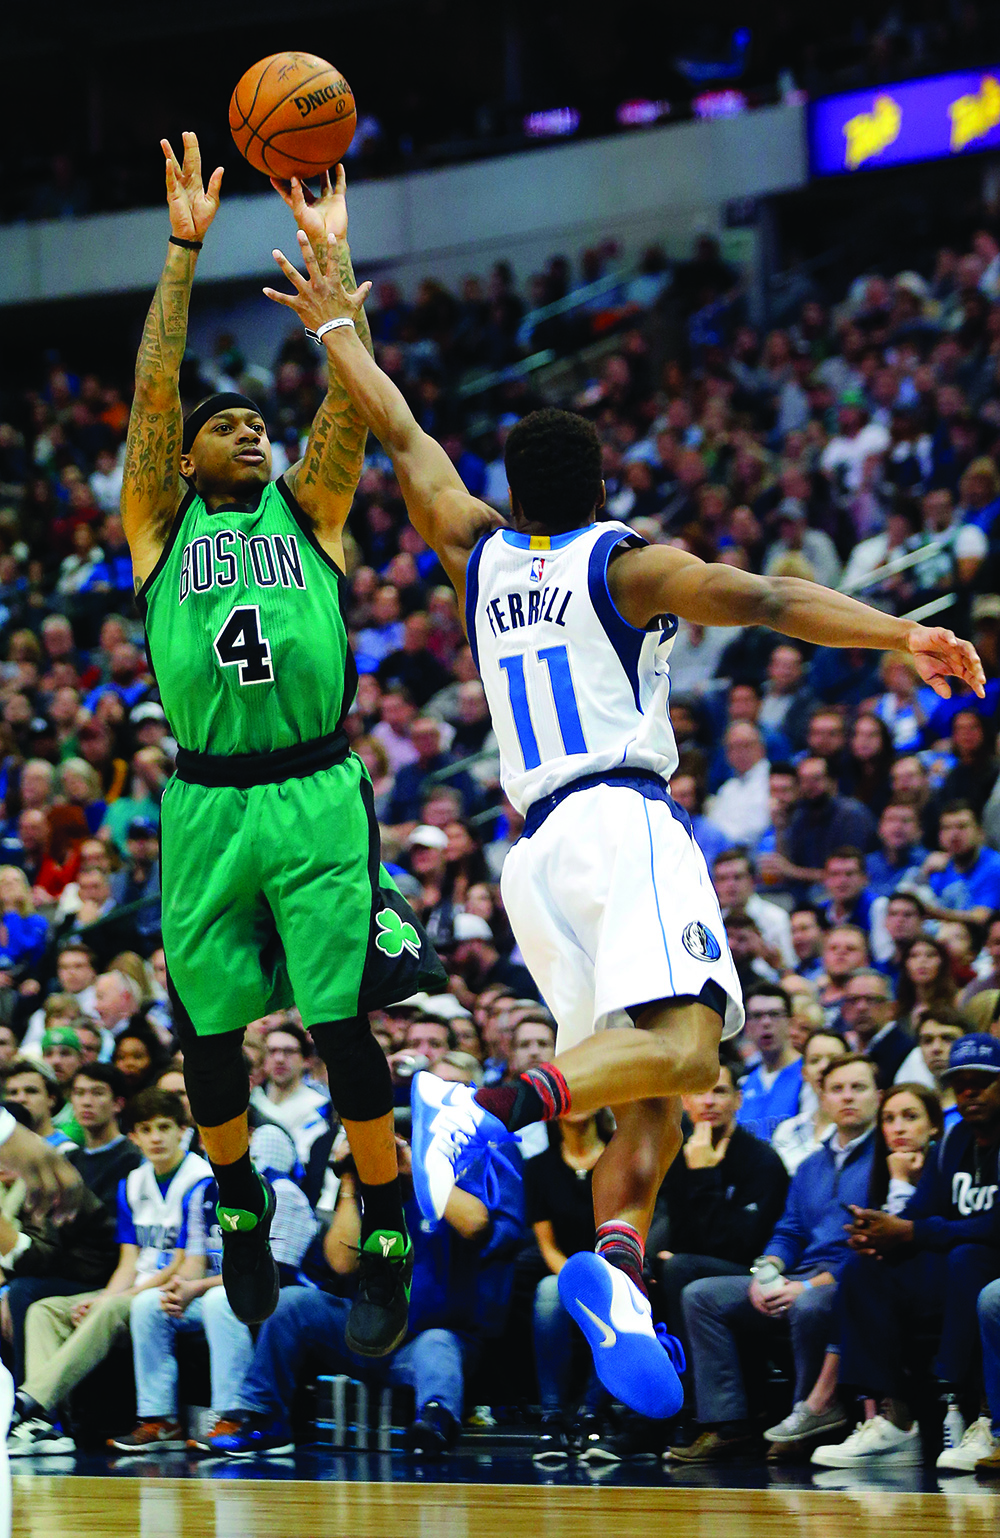 Dallas Mavericks guard Yogi Ferrell (11) tries to get a hand up in the face of Boston Celtics guard Isaiah Thomas (4) during the first half on Monday, Feb. 13, 2017 at the American Airlines Center in Dallas, Texas. (Tom Fox/Dallas Morning News/TNS) NO MAGAZINE SALES MANDATORY CREDIT; NO SALES; INTERNET USE BY TNS CONTRIBUTORS ONLY